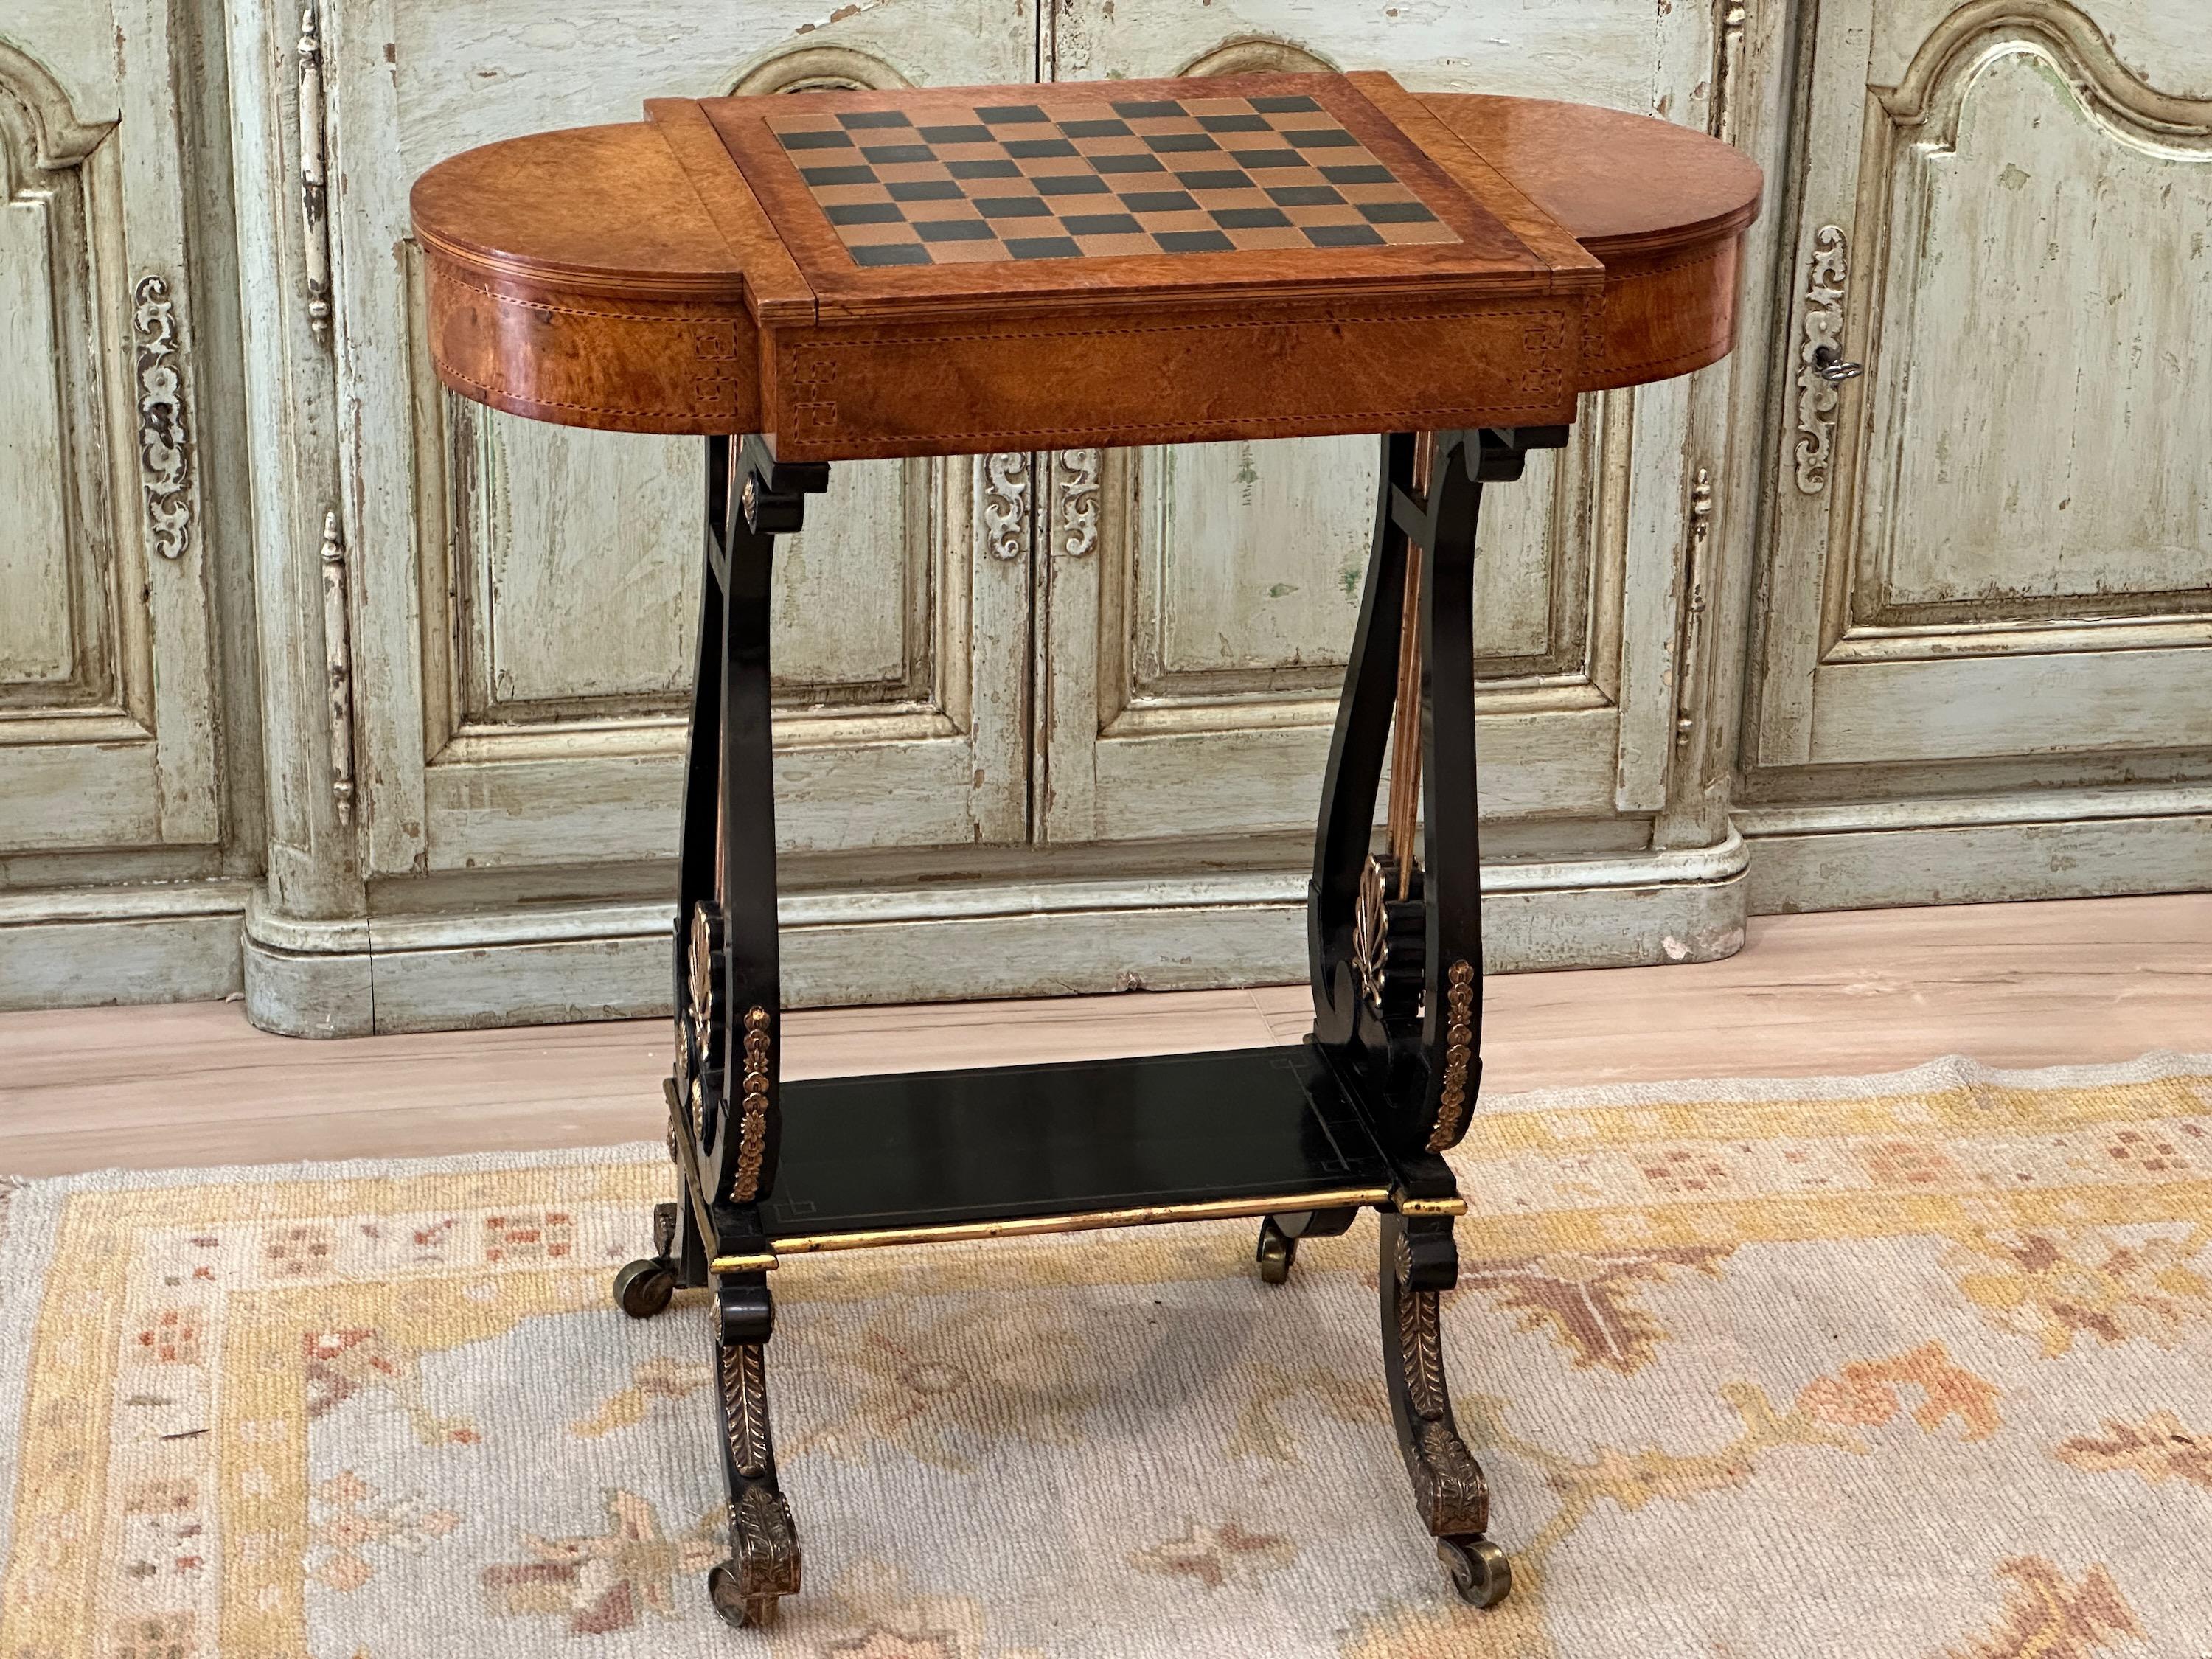 An early 19th C. English Regency period games table in amboyna burl wood with inset tooled leather backgammon board and tooled chess board on reverse side of top resting on ebonized lyre shaped legs heavily adorned with gilt bronze acanthus shaped